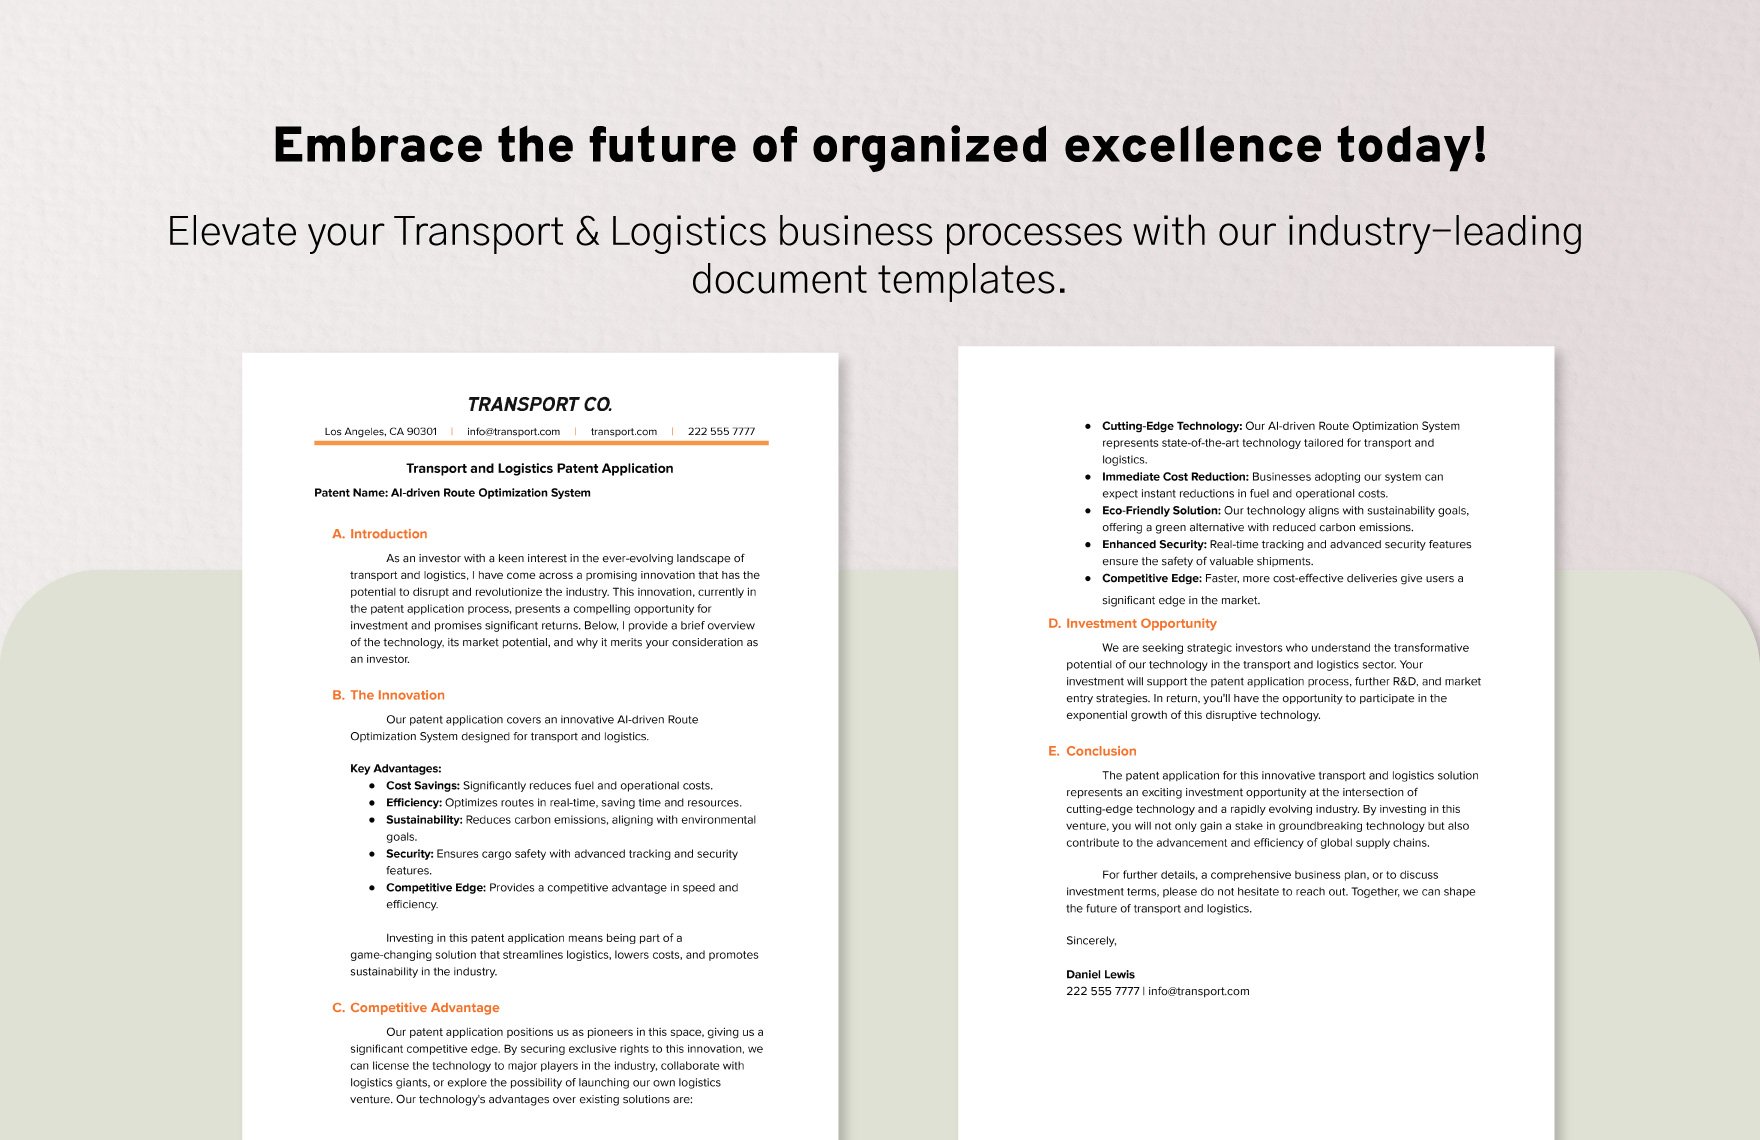 Transport and Logistics Patent Application Template